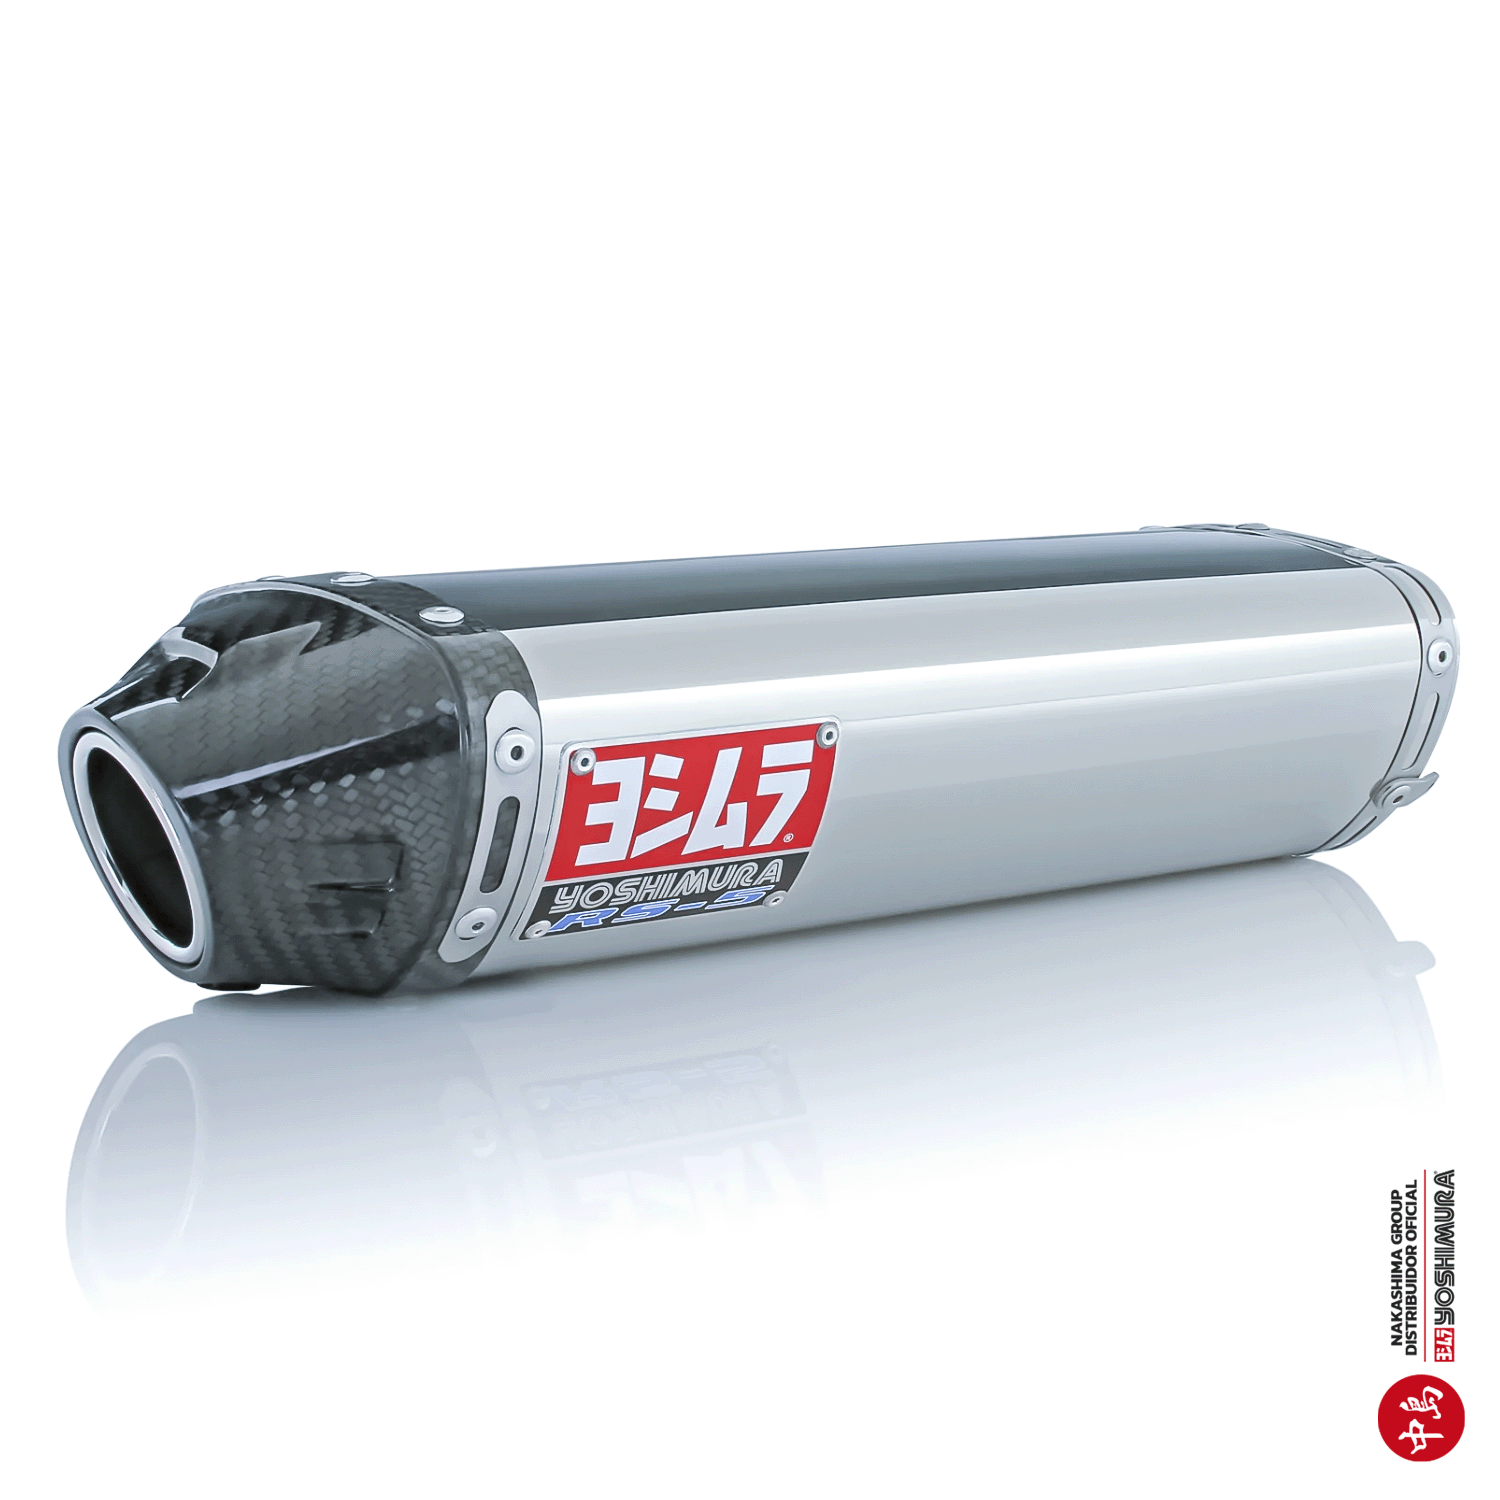 ZX-6R/RR 05-06 RS-5 Stainless Slip-On Exhaust, w/ Stainless Muffler